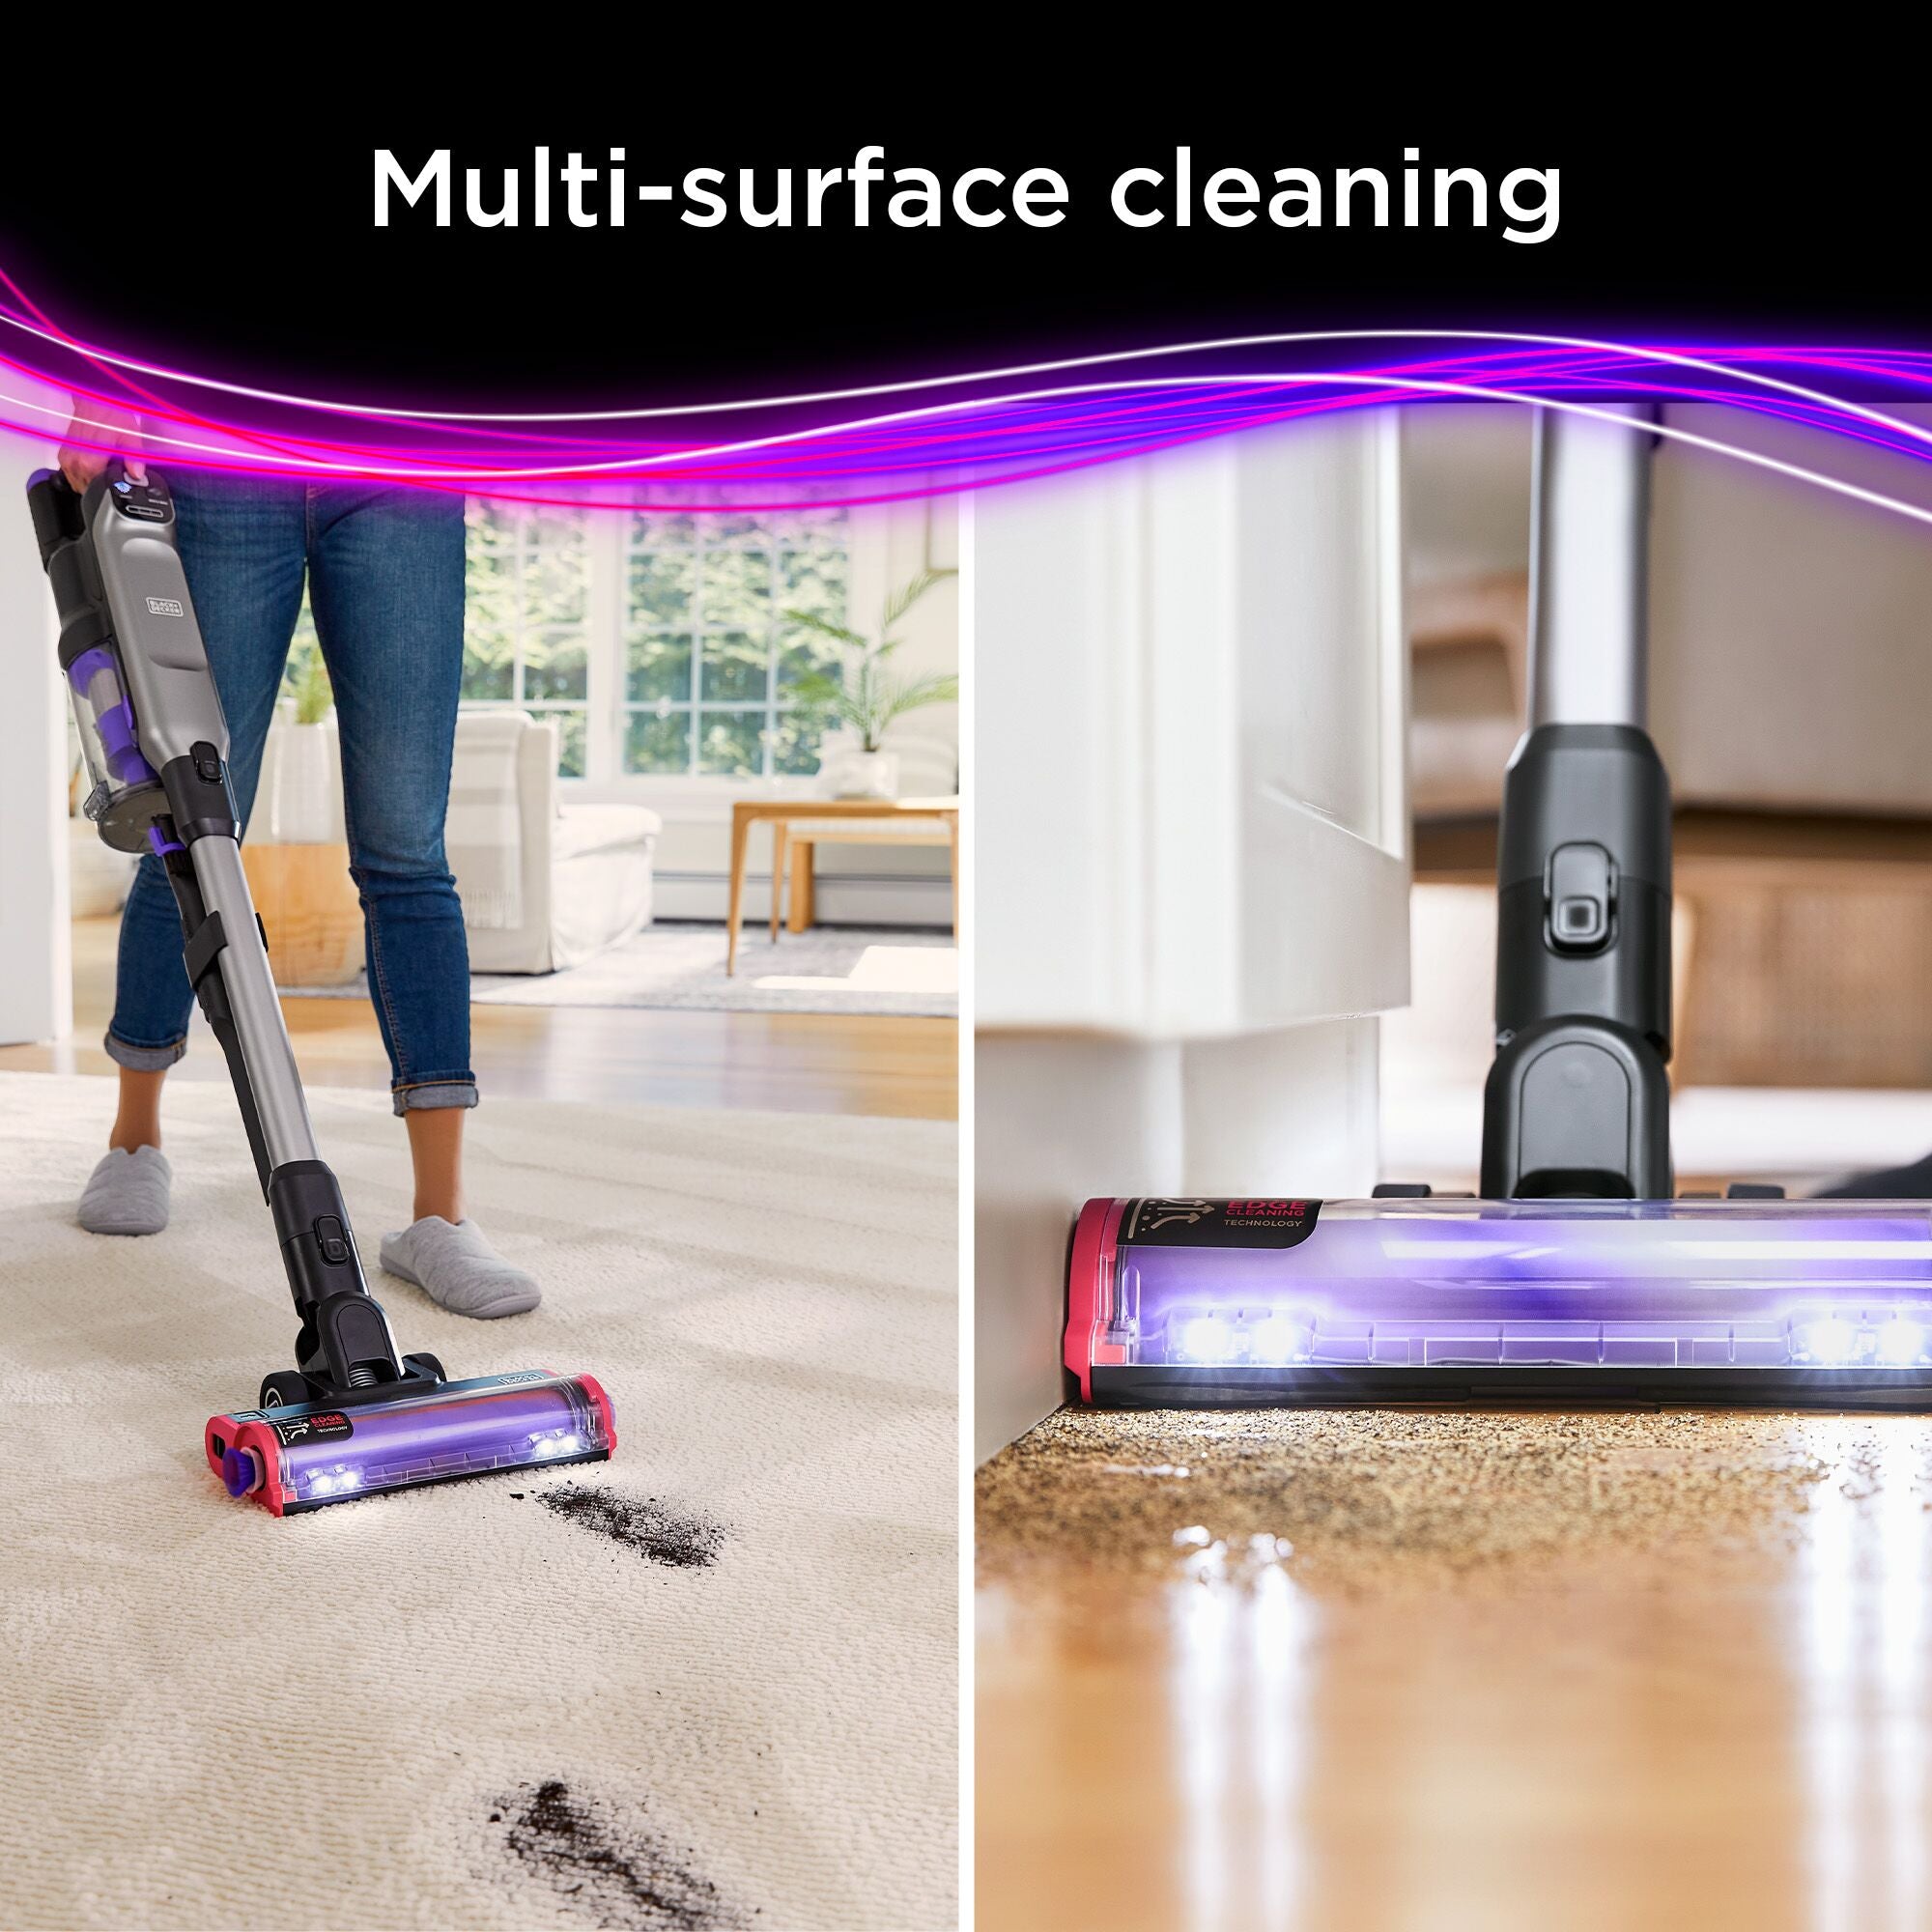 BLACK+DECKER SUMMITSERIES Stick Vac showing in handheld mode and stick vac mode